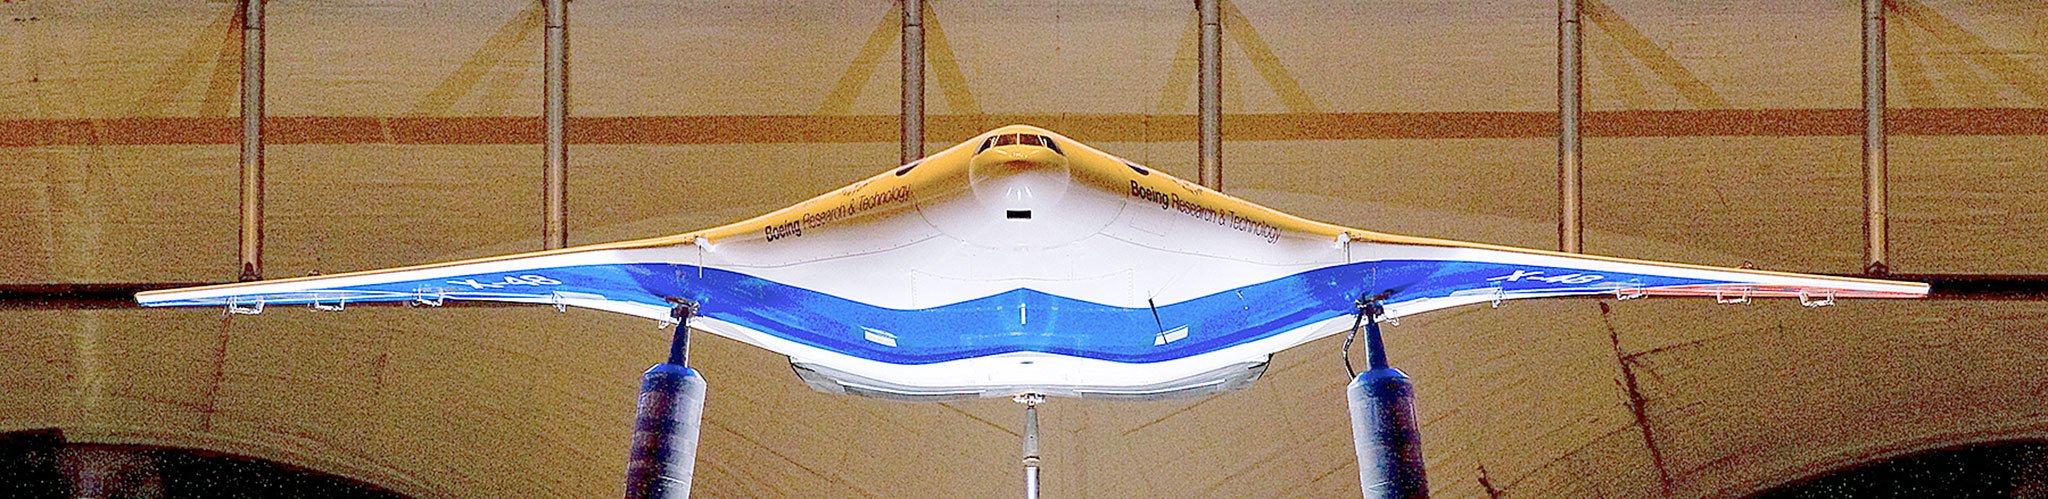 Boeing and NASA have been experimenting with a design for an unmanned aircraft called the X-48, an example of a Blended Wing Body. Blended wing designs, which have little in the way of a fuselage and sometimes no tail, could greatly increase fuel efficiency. The X-48 shown here is a scale model with a 21-foot wingspan; at full size, the aircraft would have a wingspan of 240 feet. (Boeing Co.)